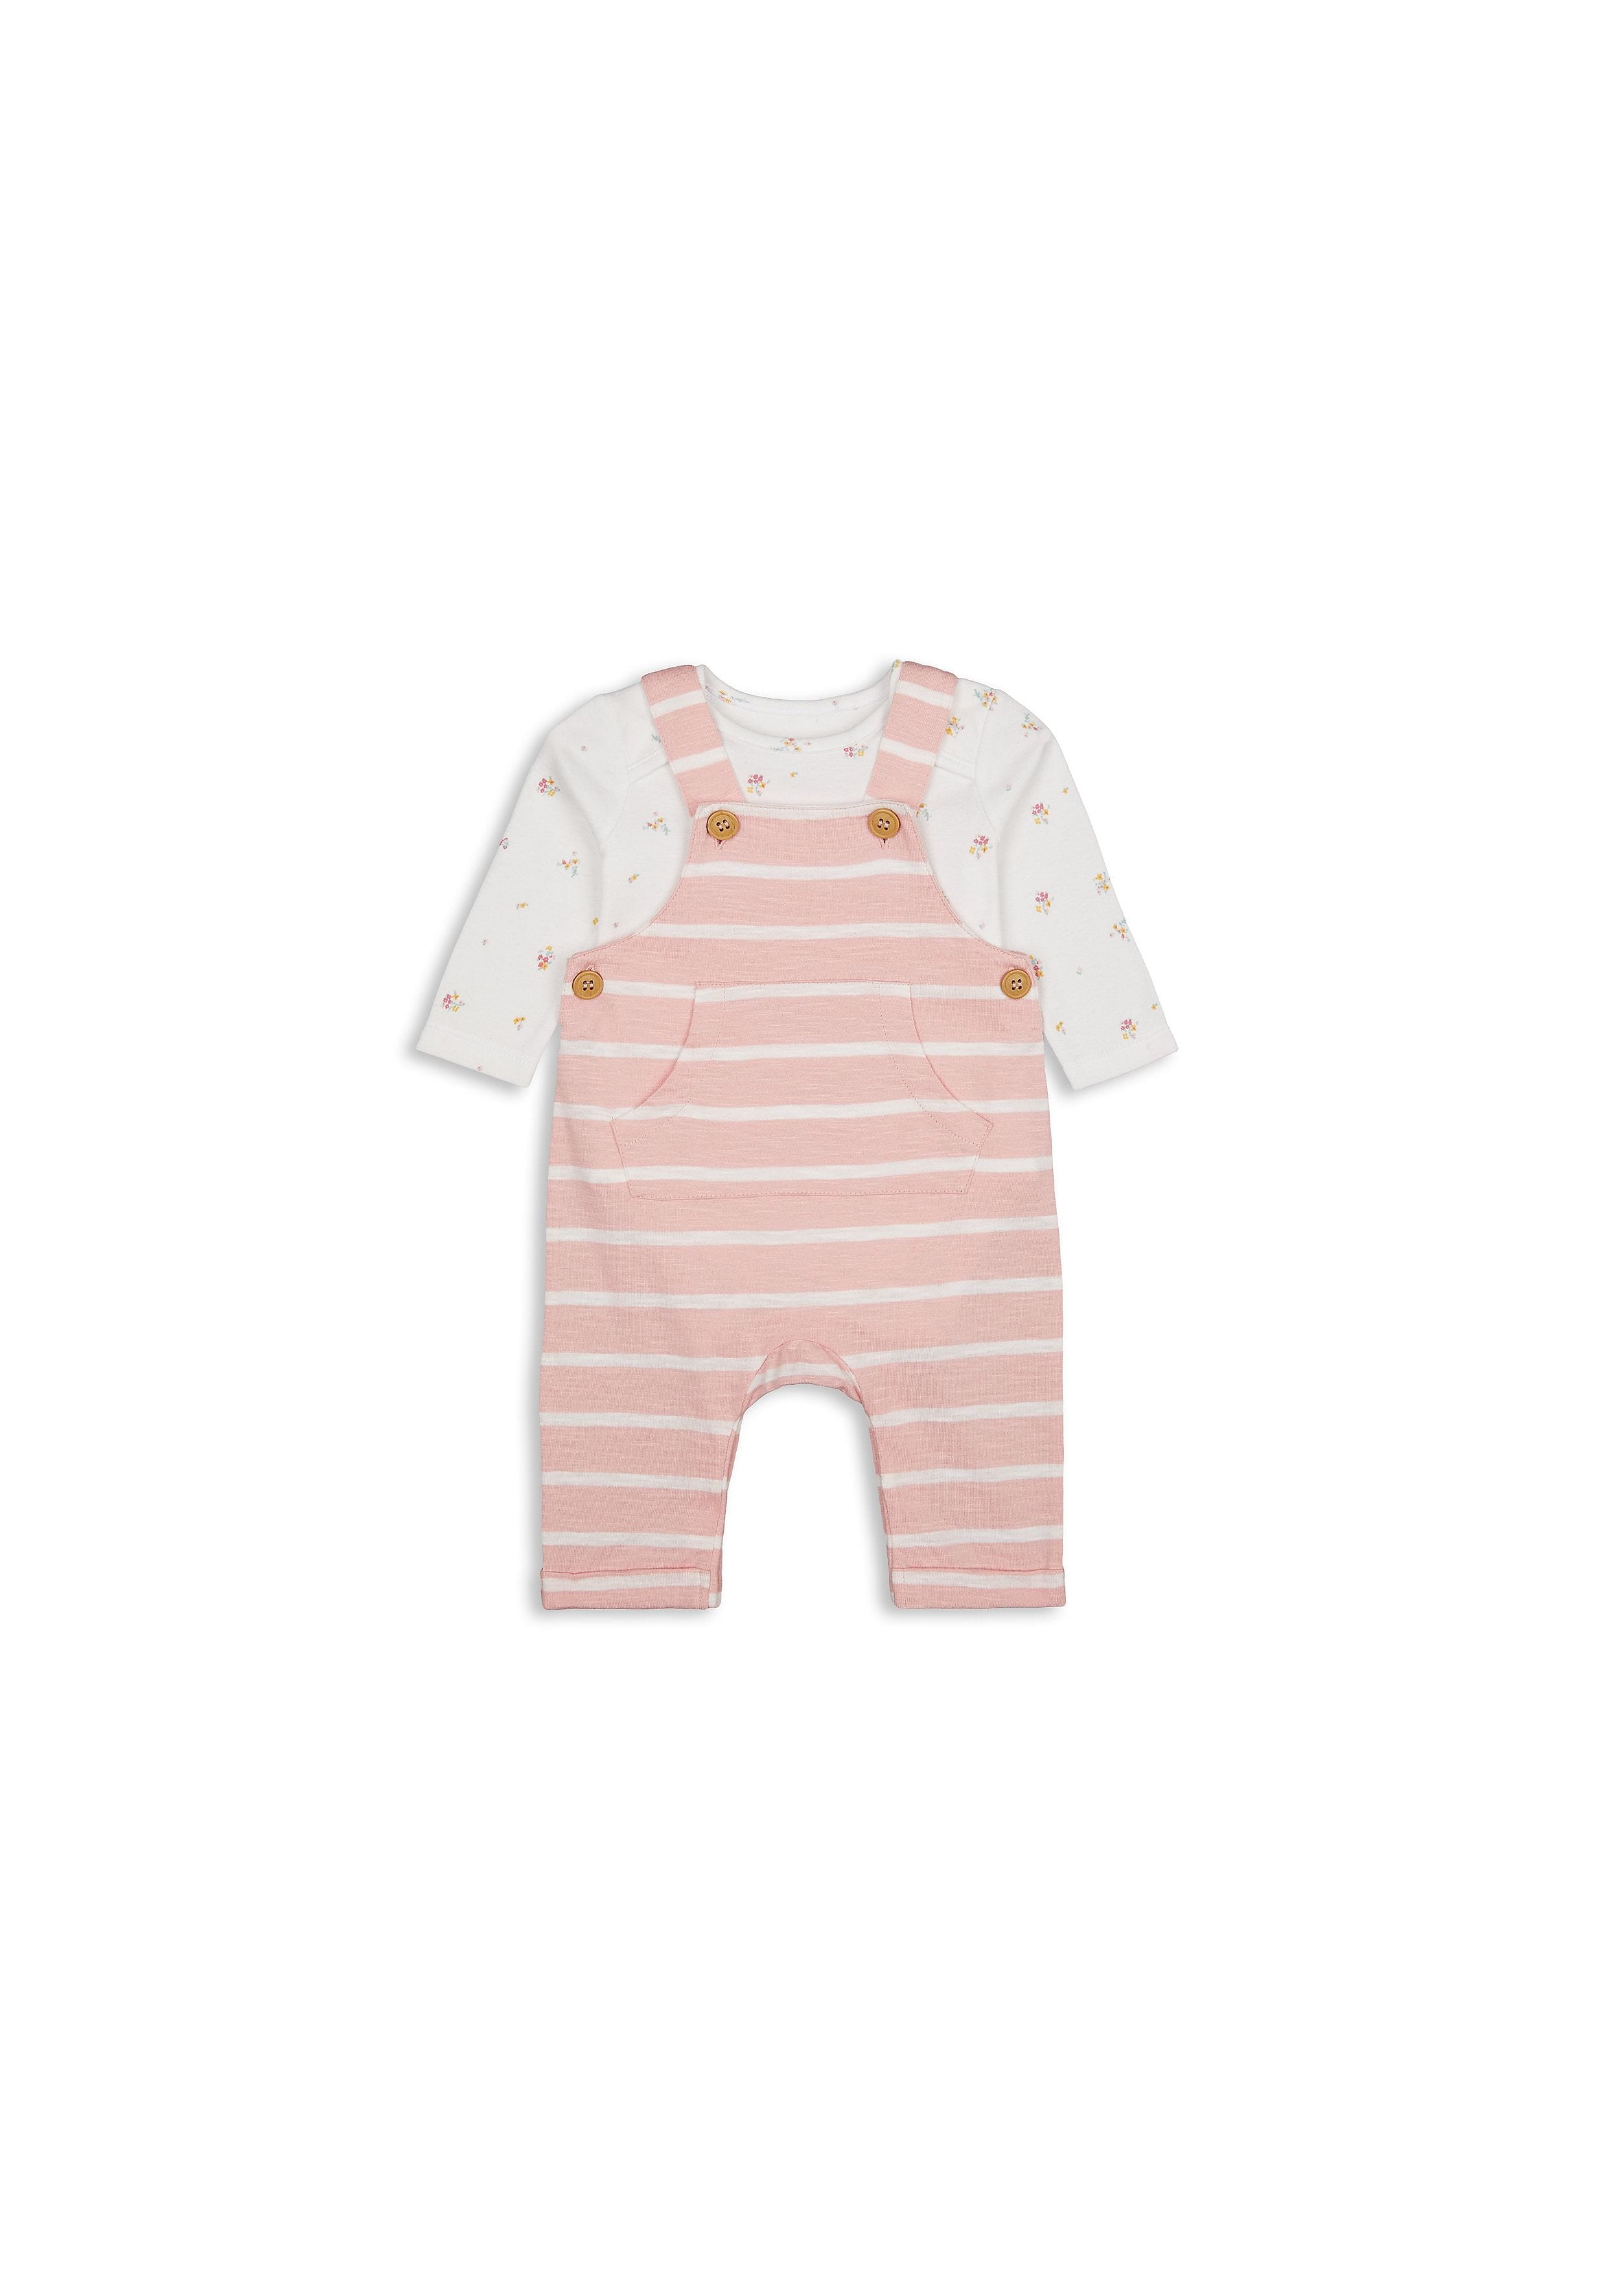 Mothercare | Girls Full Sleeves Dungaree Set Striped - Pink 0